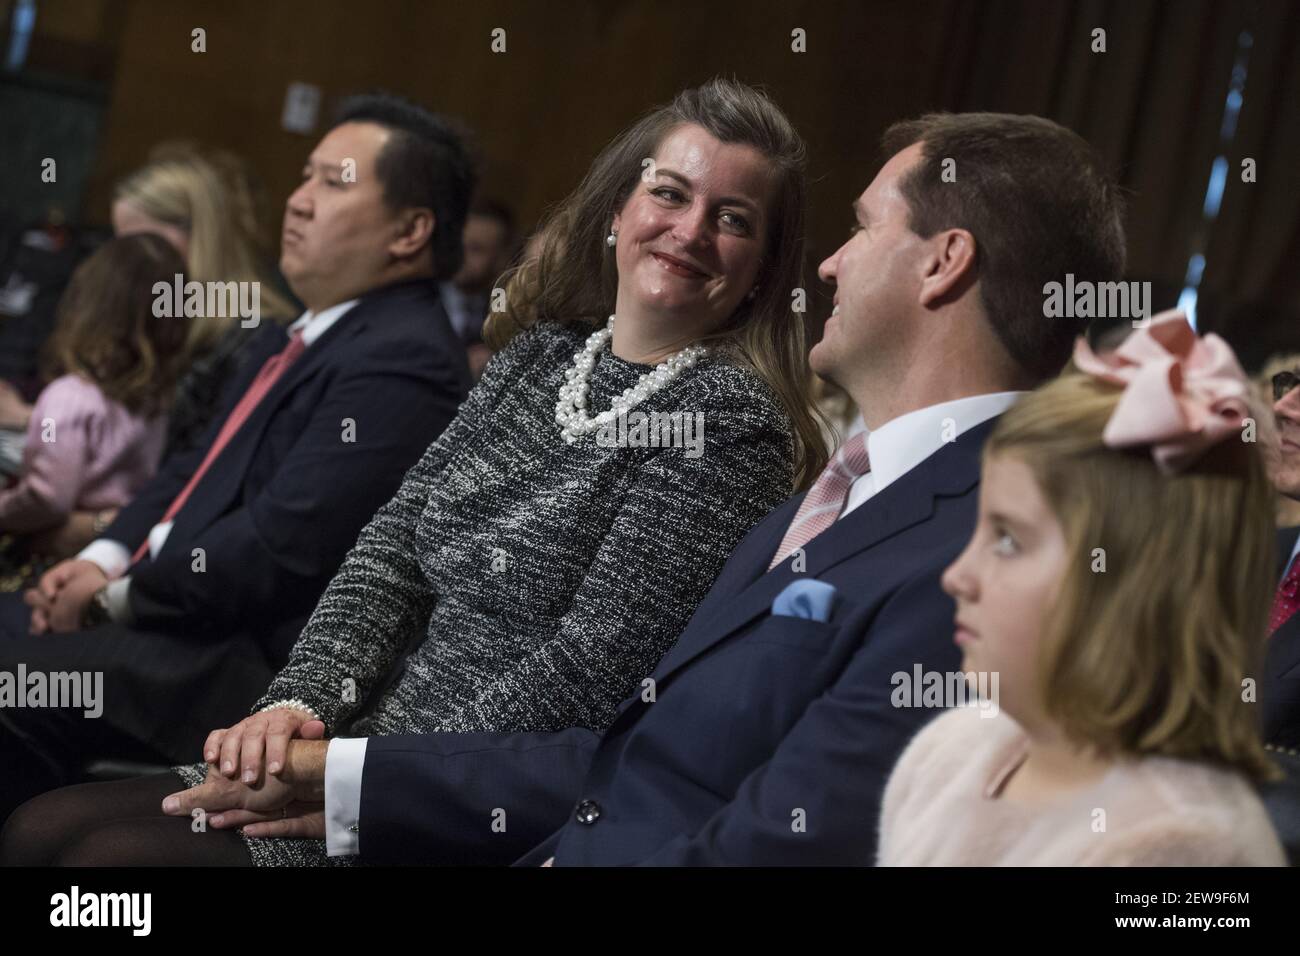 UNITED STATES - NOVEMBER 15: Don R. Willett, nominee to be a judge for the 5th U.S. Circuit Court of Appeals, appears with his wife Tiffany, and daughter Genevieve, 8, during his Senate Judiciary Committee confirmation hearing in Dirksen Building on November 15, 2017. (Photo By Tom Williams/CQ Roll Call) Stock Photo